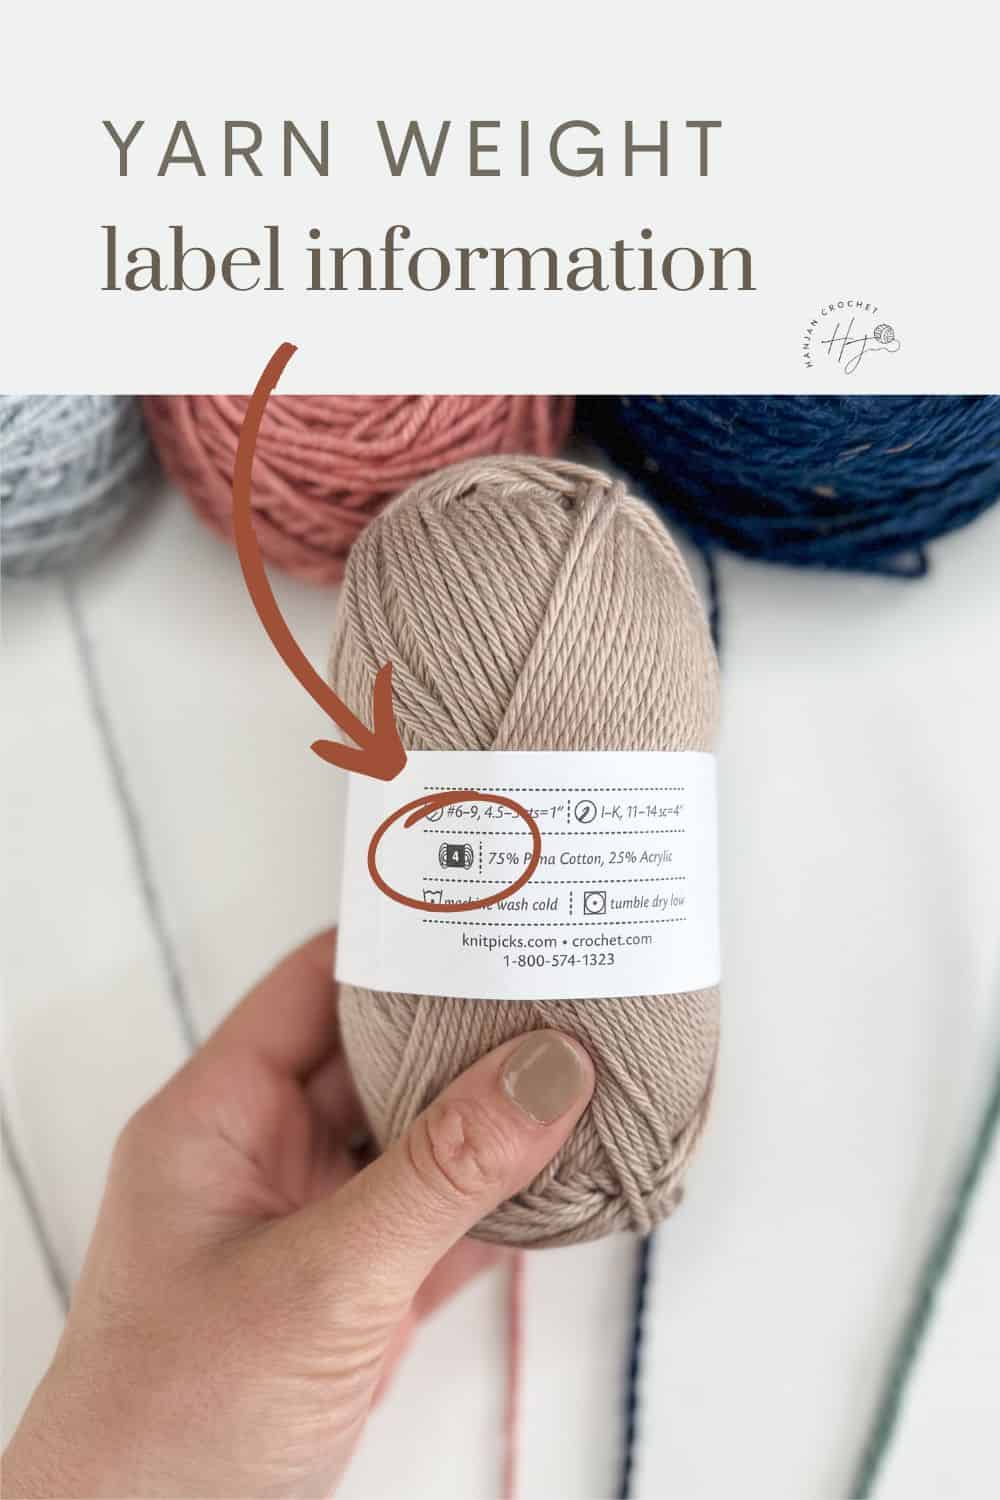 Hand holding a ball of yarn with a label indicating yarn weight and washing instructions. The background includes four other colorful balls of yarn, with a handy yarn weight chart subtly visible at the edge for easy reference.